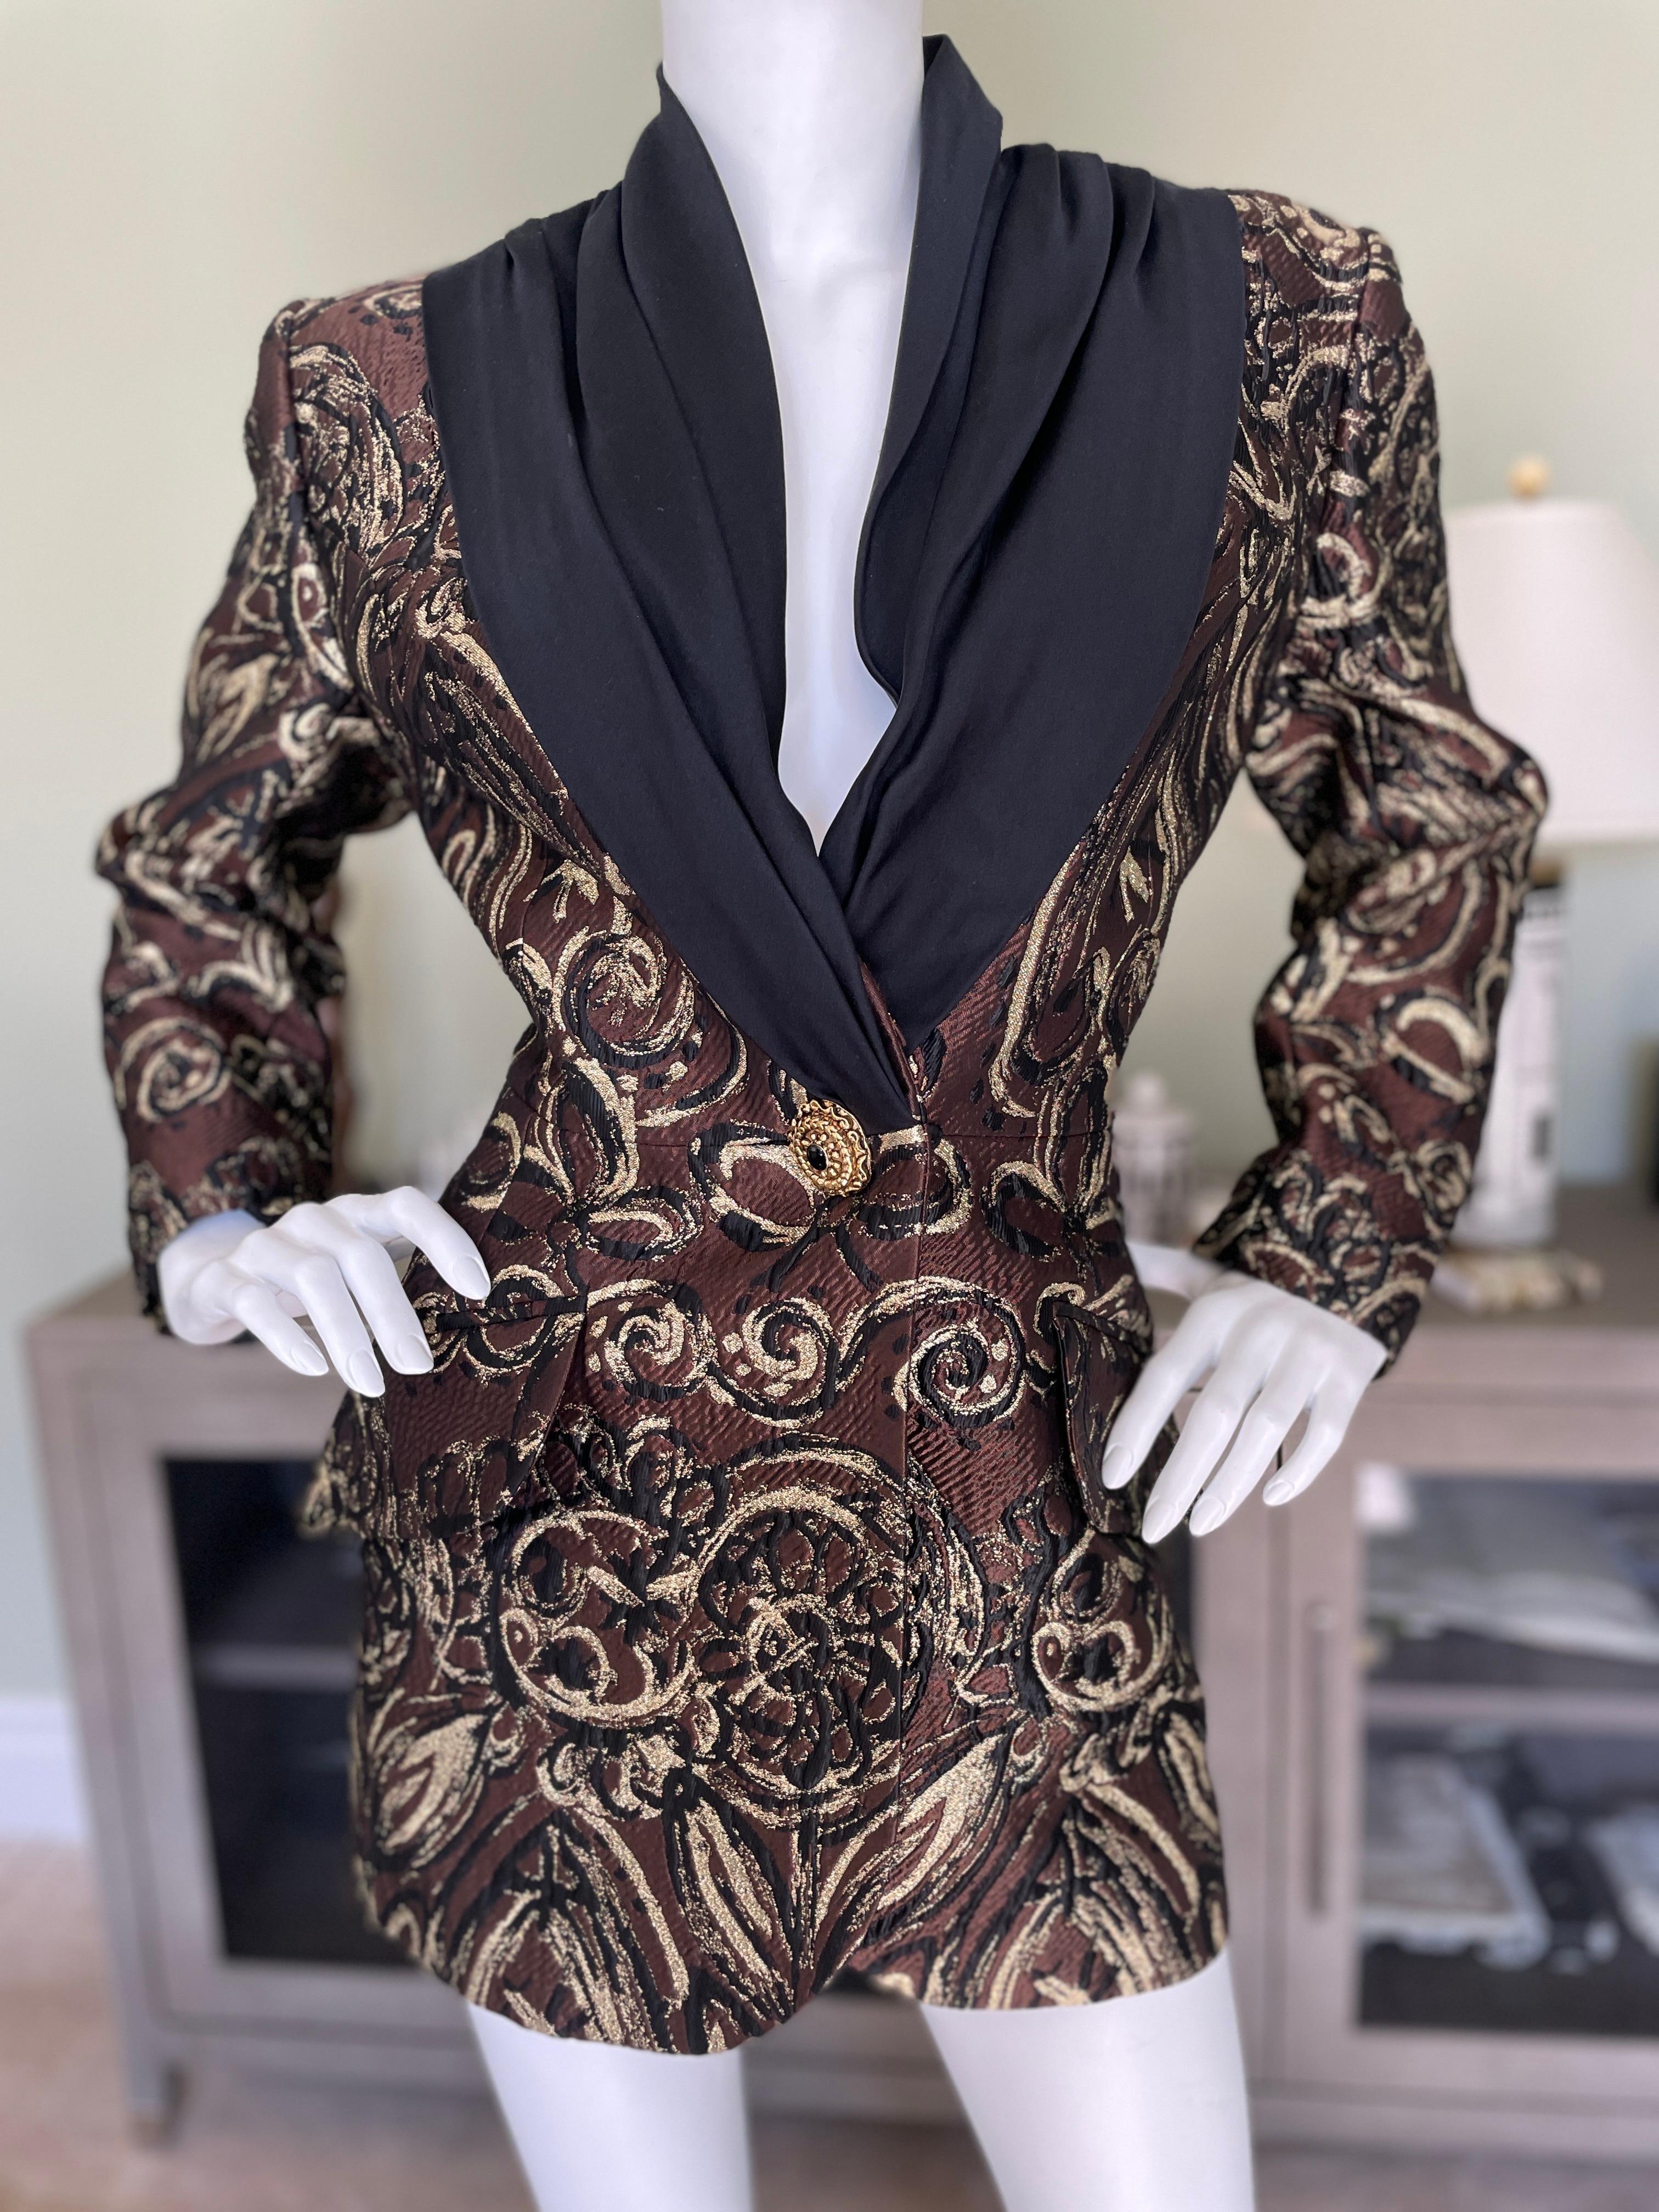 Christian Lacroix Vintage Black and Gold Arlesien Pattern Brocade Jacket
This is so pretty, so very Lacroix .
 Size 42
Bust 40